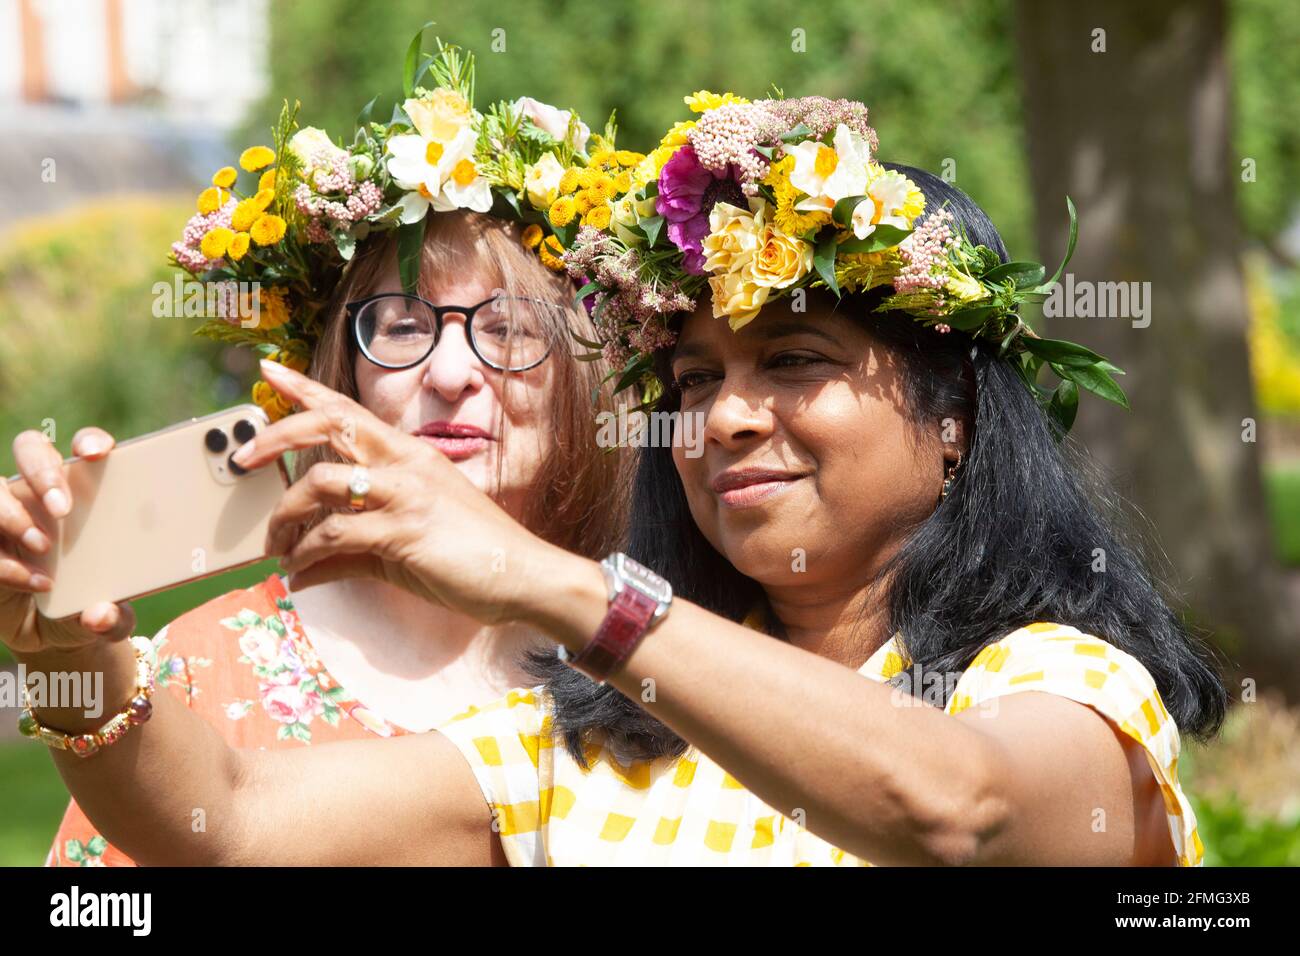 London, UK, 9 May 2021: Melanie, a clinical scientist (left)  and her friend since school days Bea, an engineer, (right) pose with the flower crowns they made to celebrate Garden Day. This event was at Chelsea Physic Garden and led by florist Fran Bailey of The Fresh Flower company. Anna Watson/Alamy Live News Stock Photo